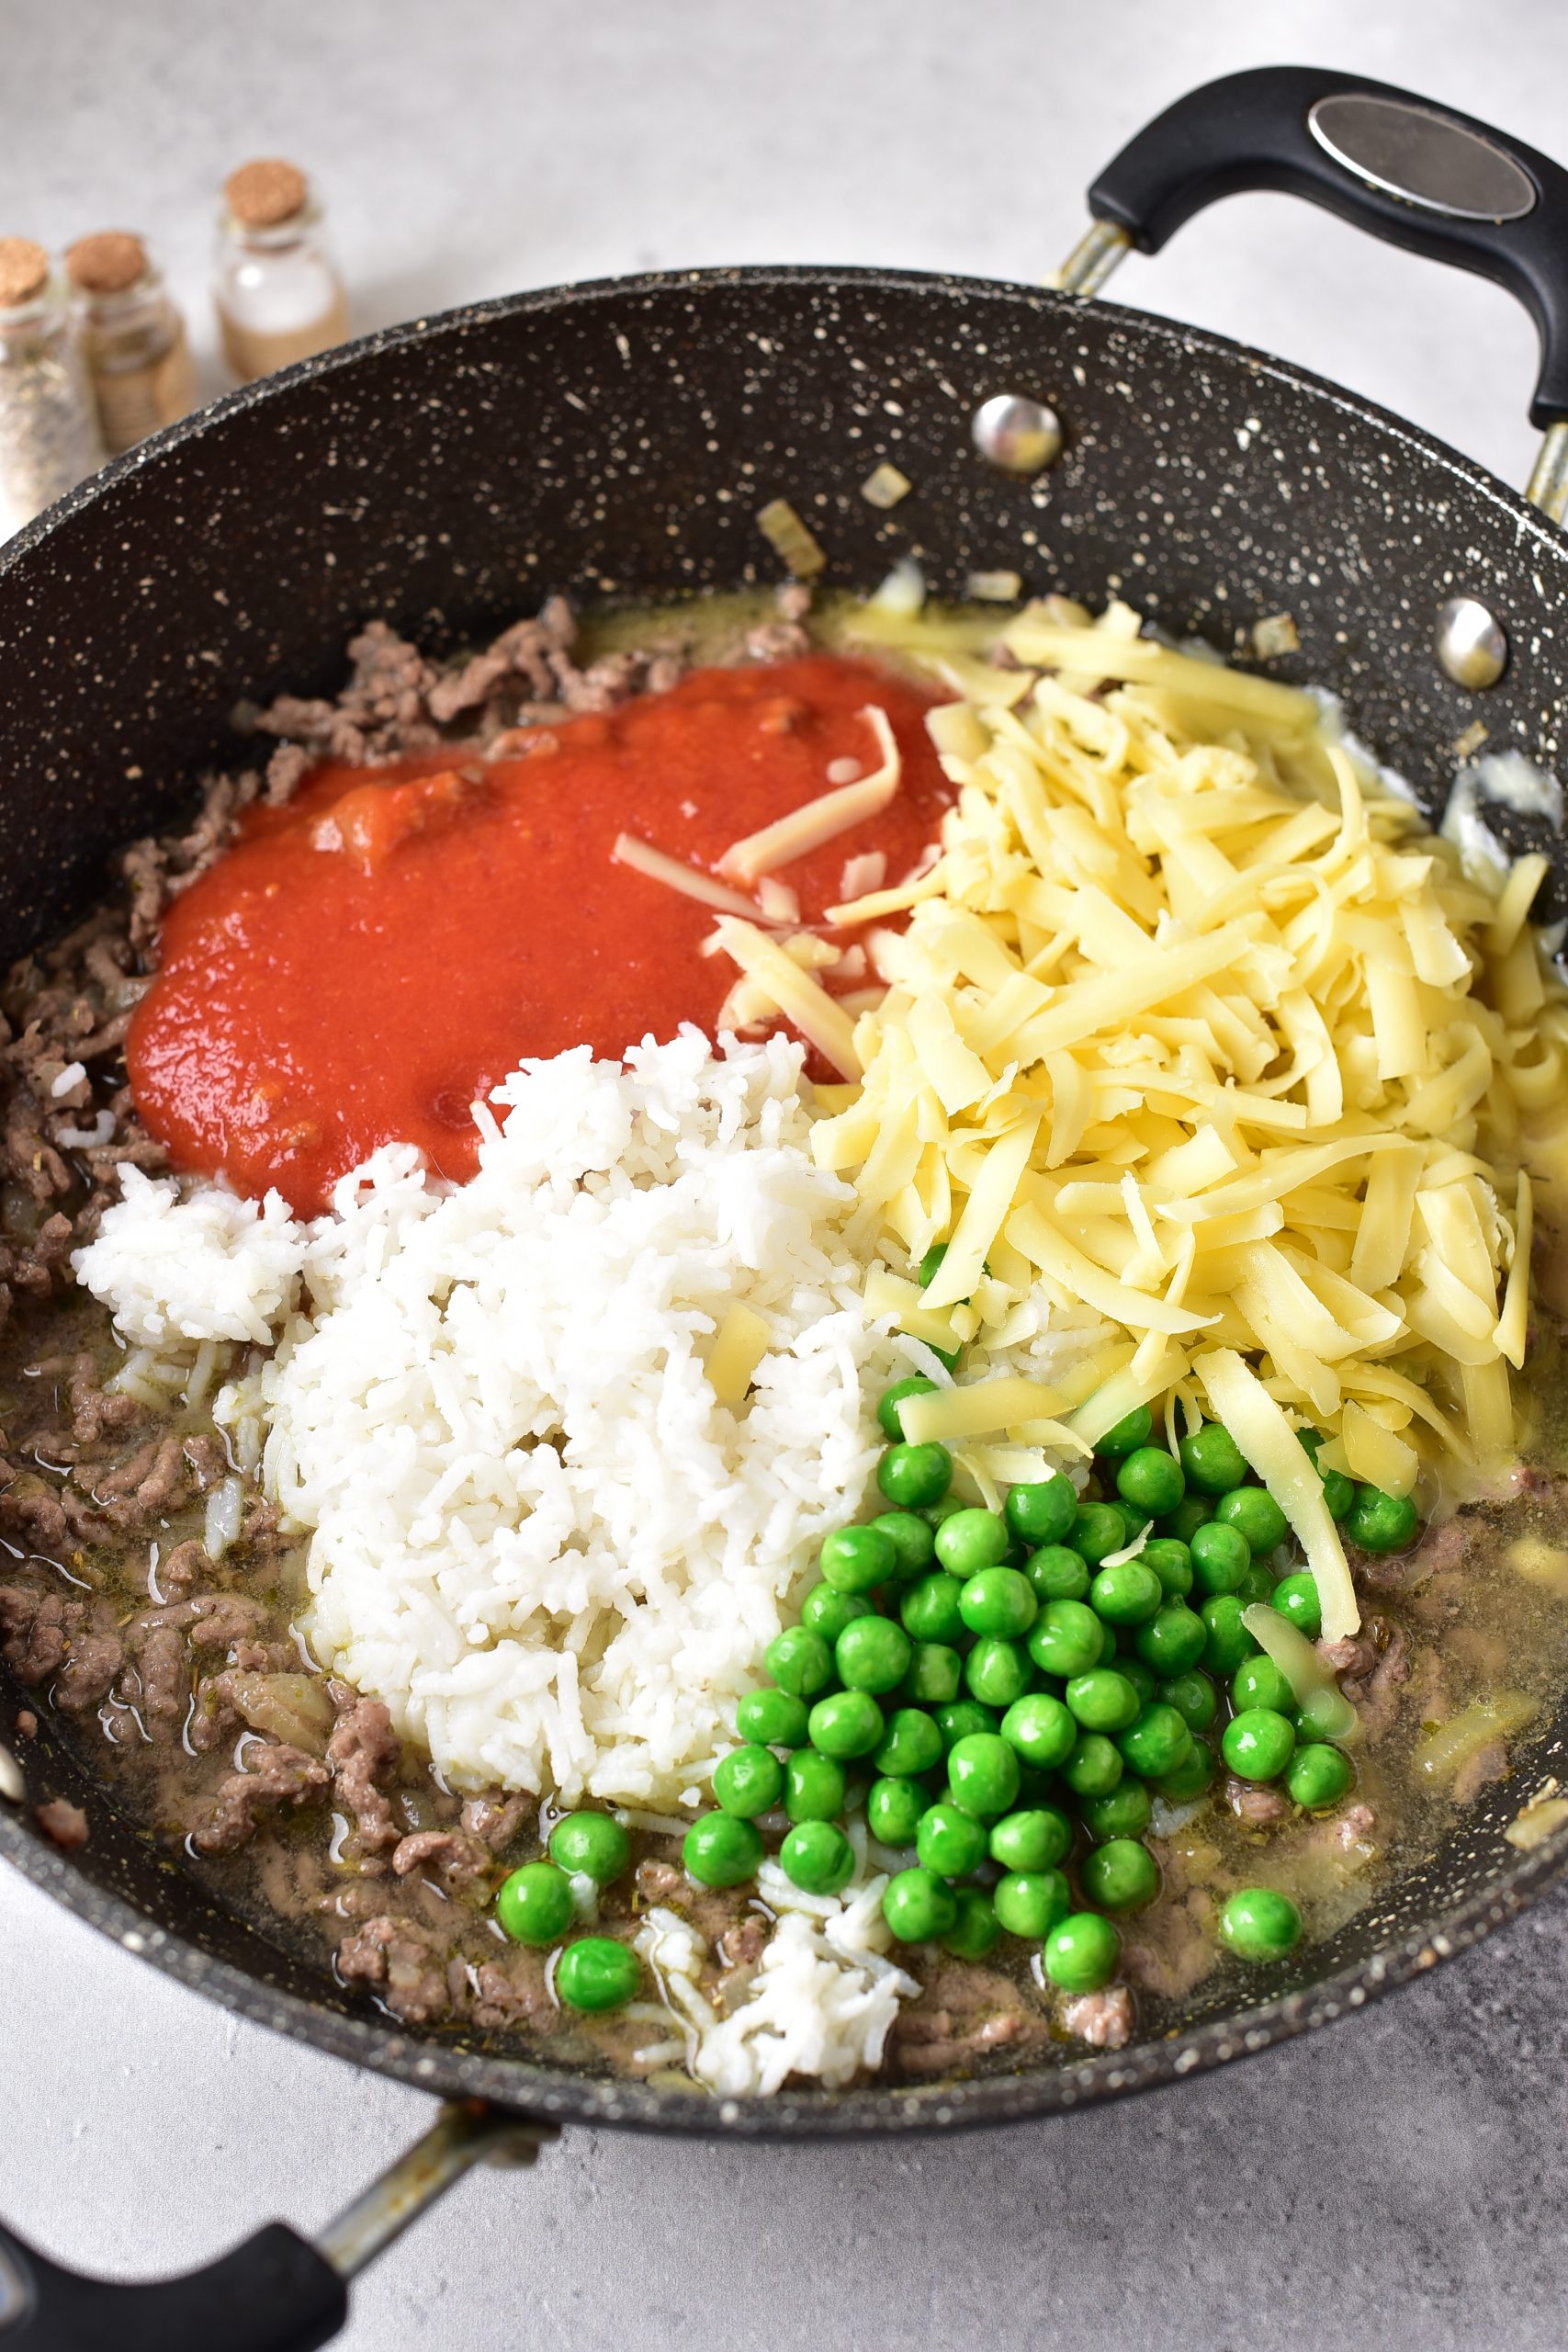 Mix in the tomato sauce, rice, peas, broth, and one cup of cheese. Simmer the mixture until the cheese has melted. 